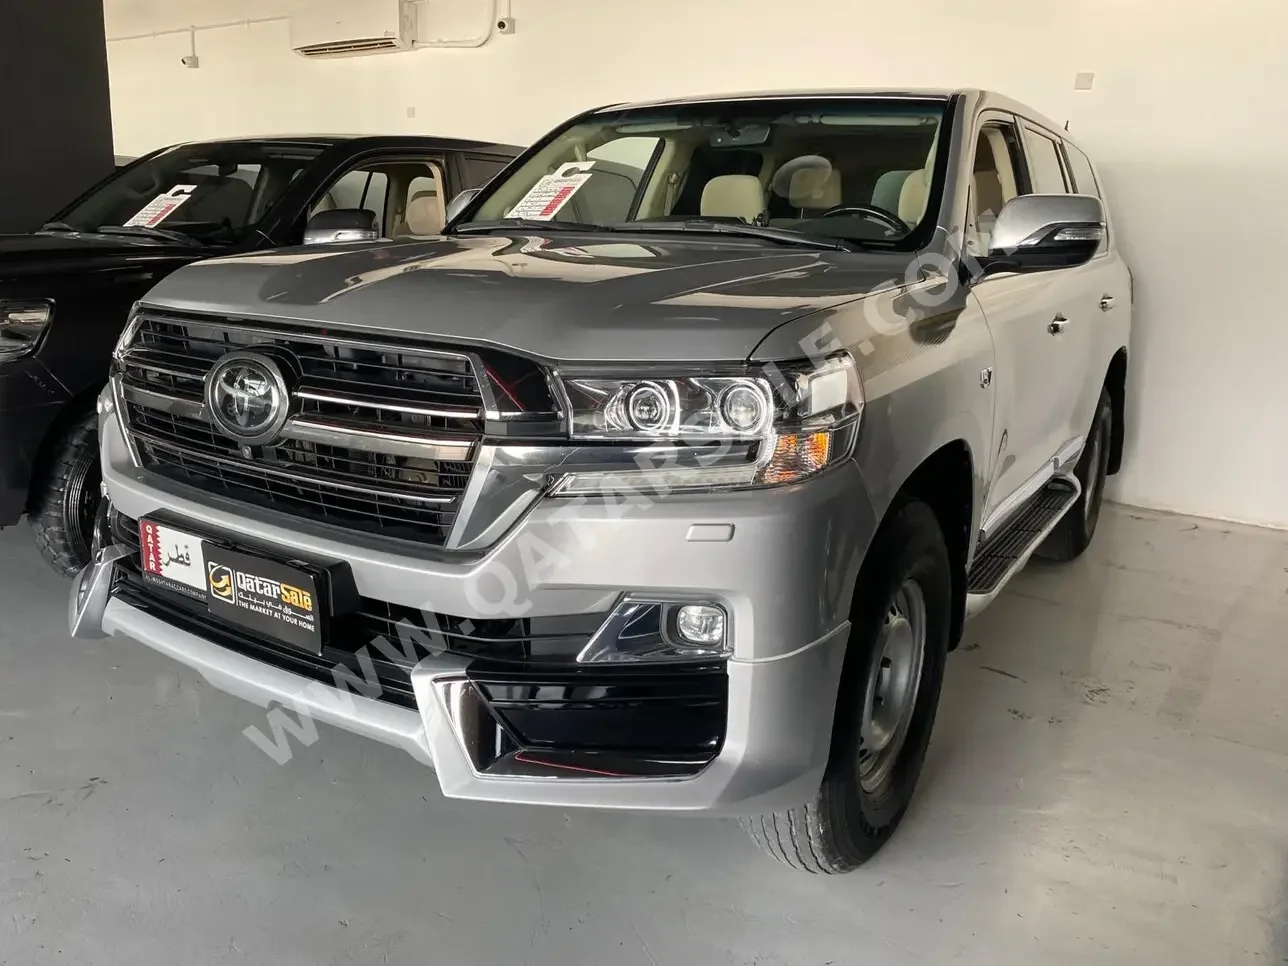 Toyota  Land Cruiser  VXR- Grand Touring S  2020  Automatic  171,000 Km  8 Cylinder  Four Wheel Drive (4WD)  SUV  Silver